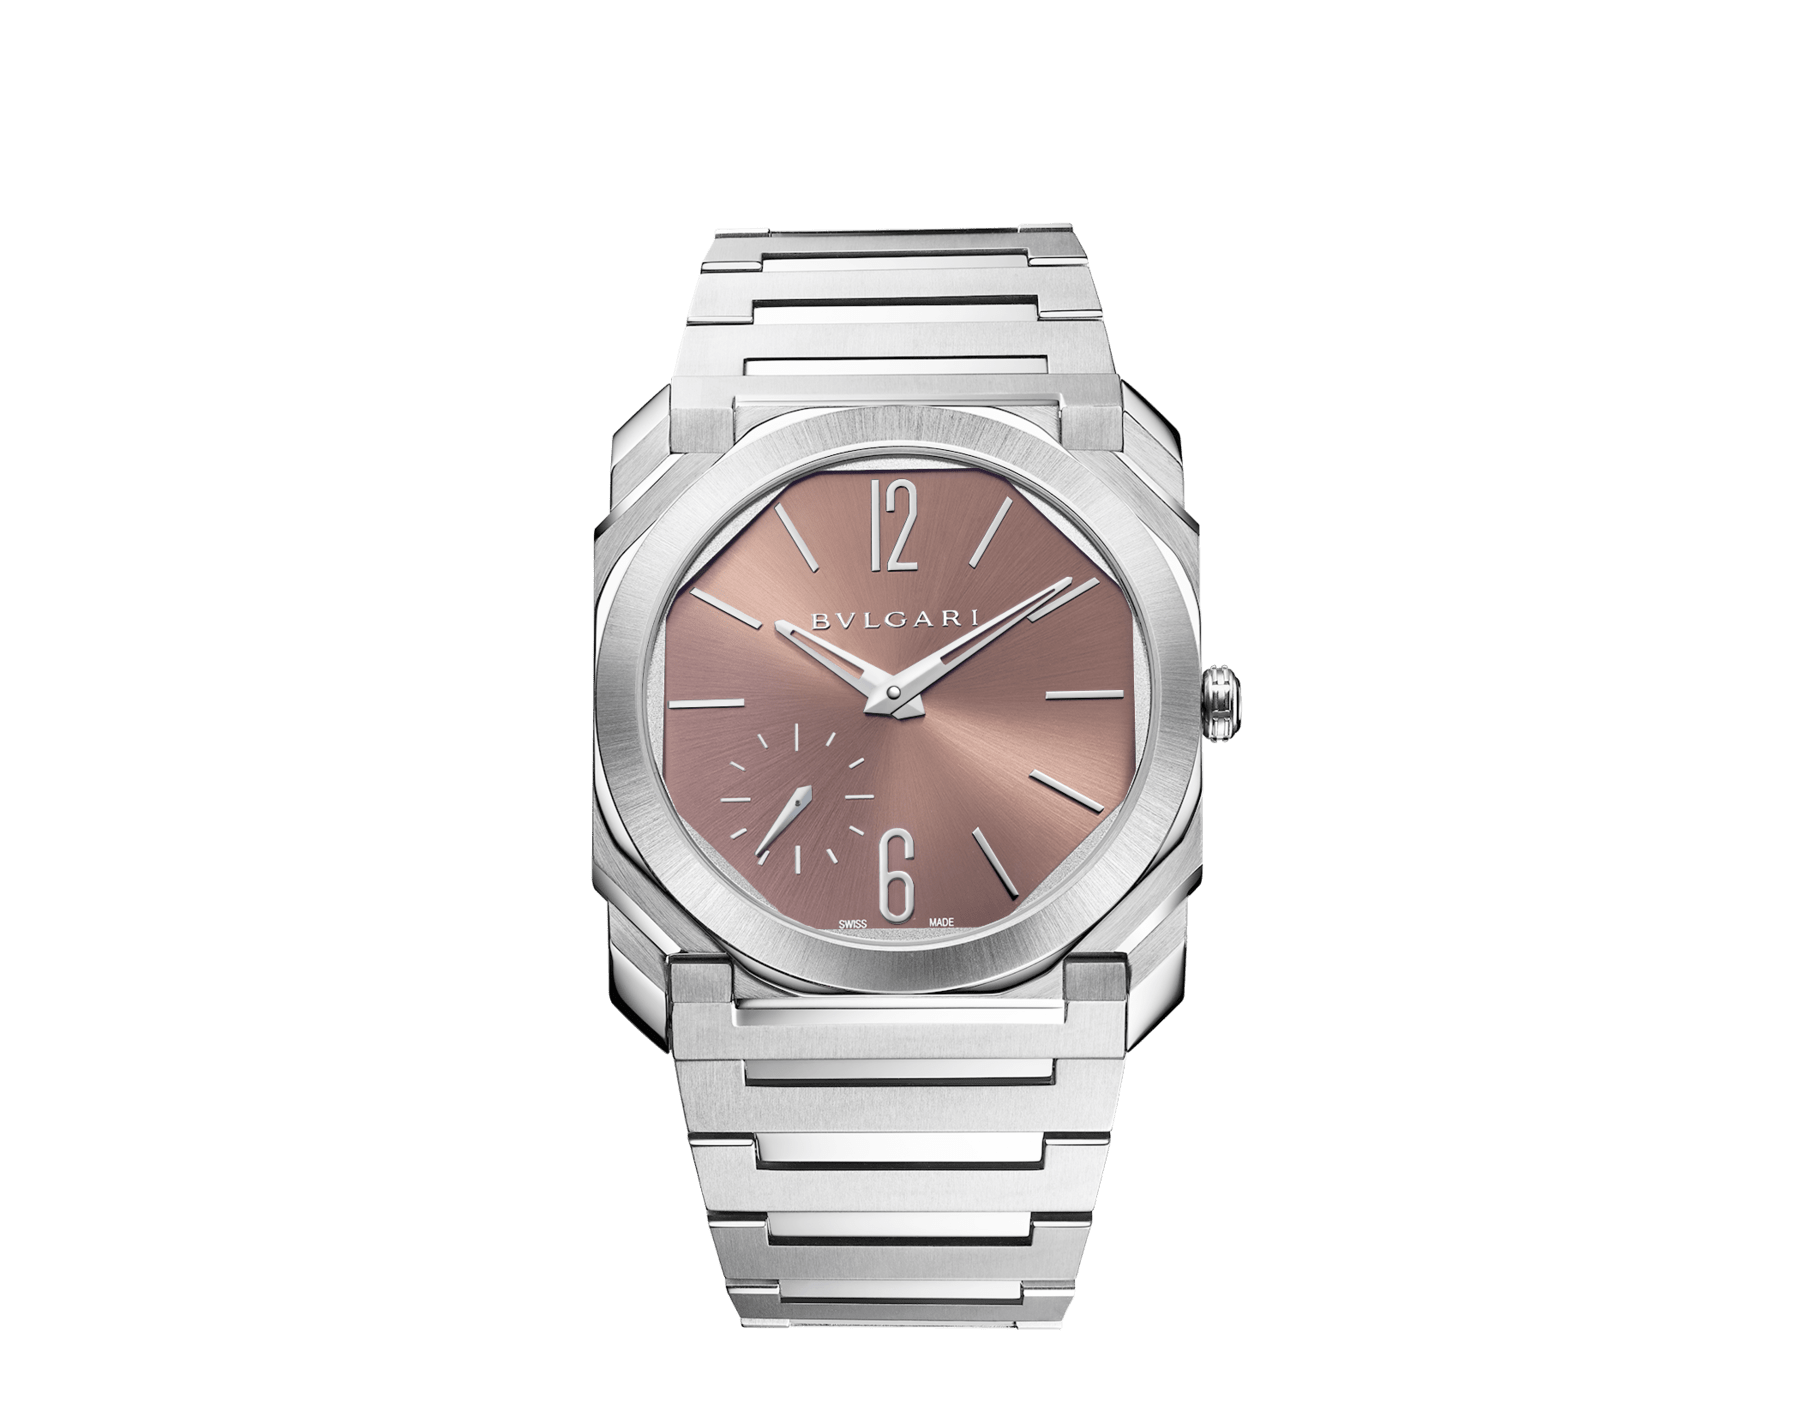 Octo Finissimo Automatic watch in satin-polished stainless steel with mechanical manufacture ultra-thin movement (2.23 mm thick), automatic winding and sun-brushed metallic salmon dial with rhodium applied stickers. Water resistant up to 100 meters. 103856 image 1